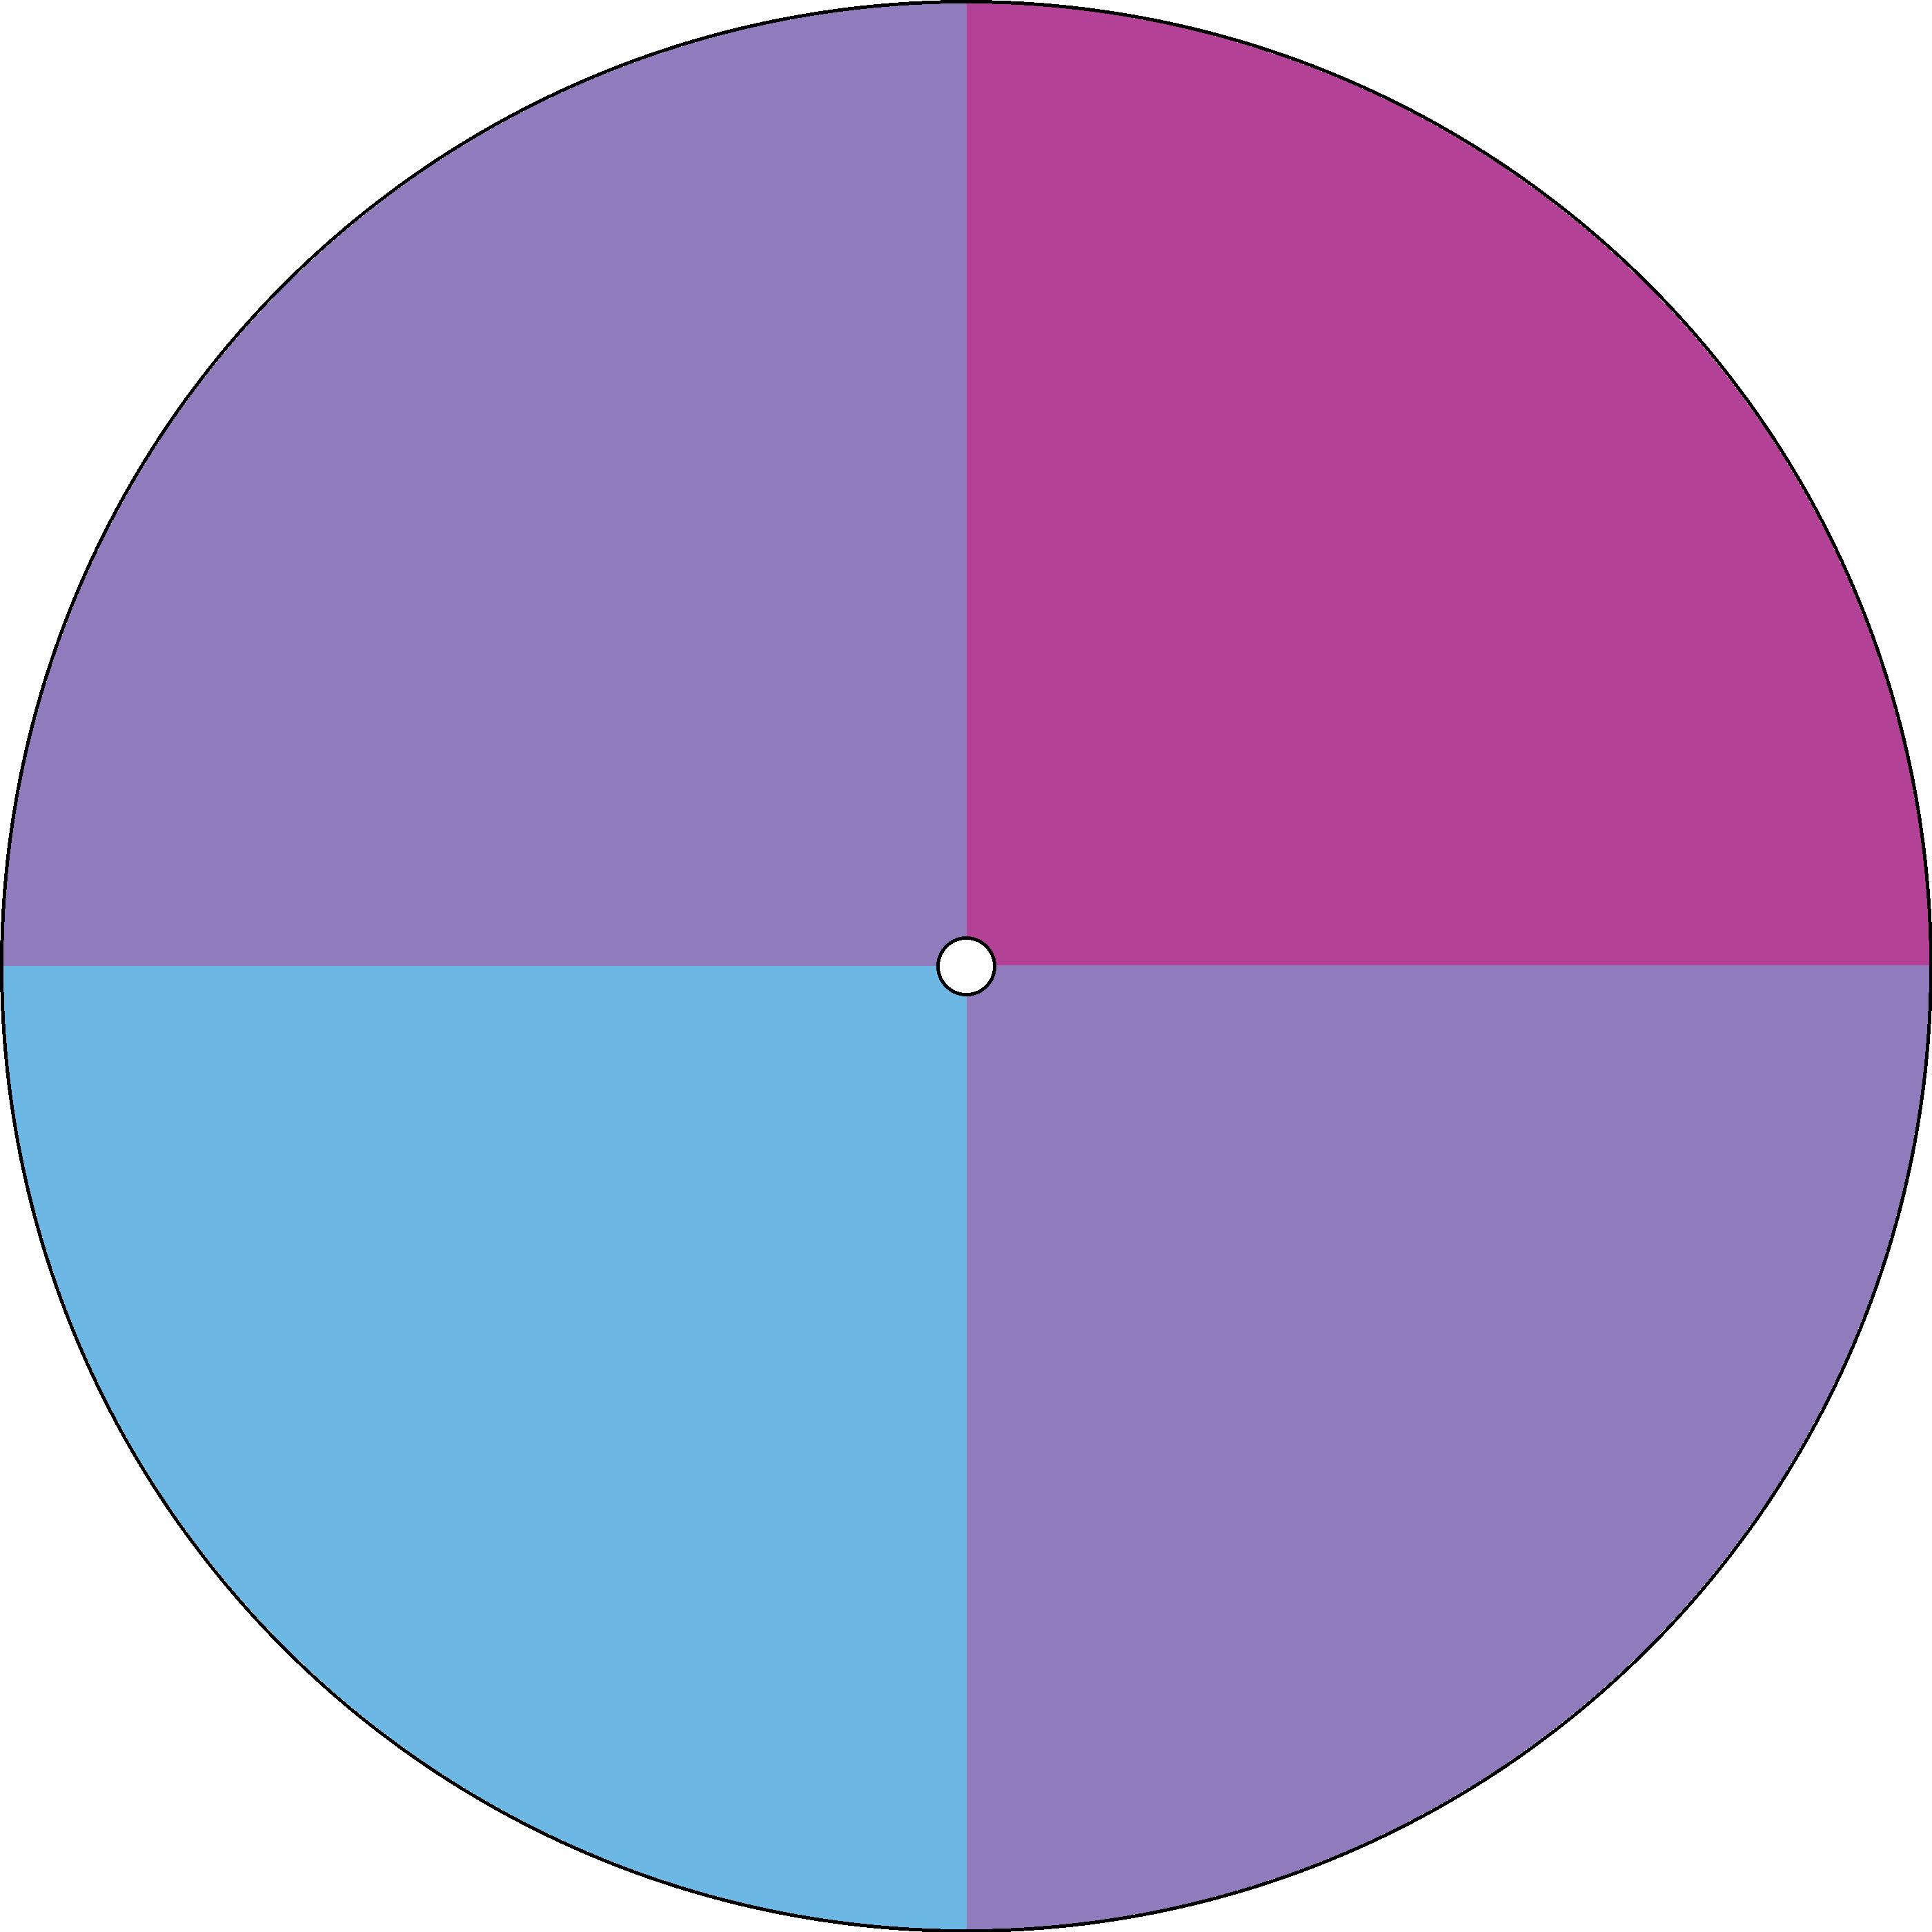 Radial Gradient - Quarterly - Dizzy Care Network 3.png